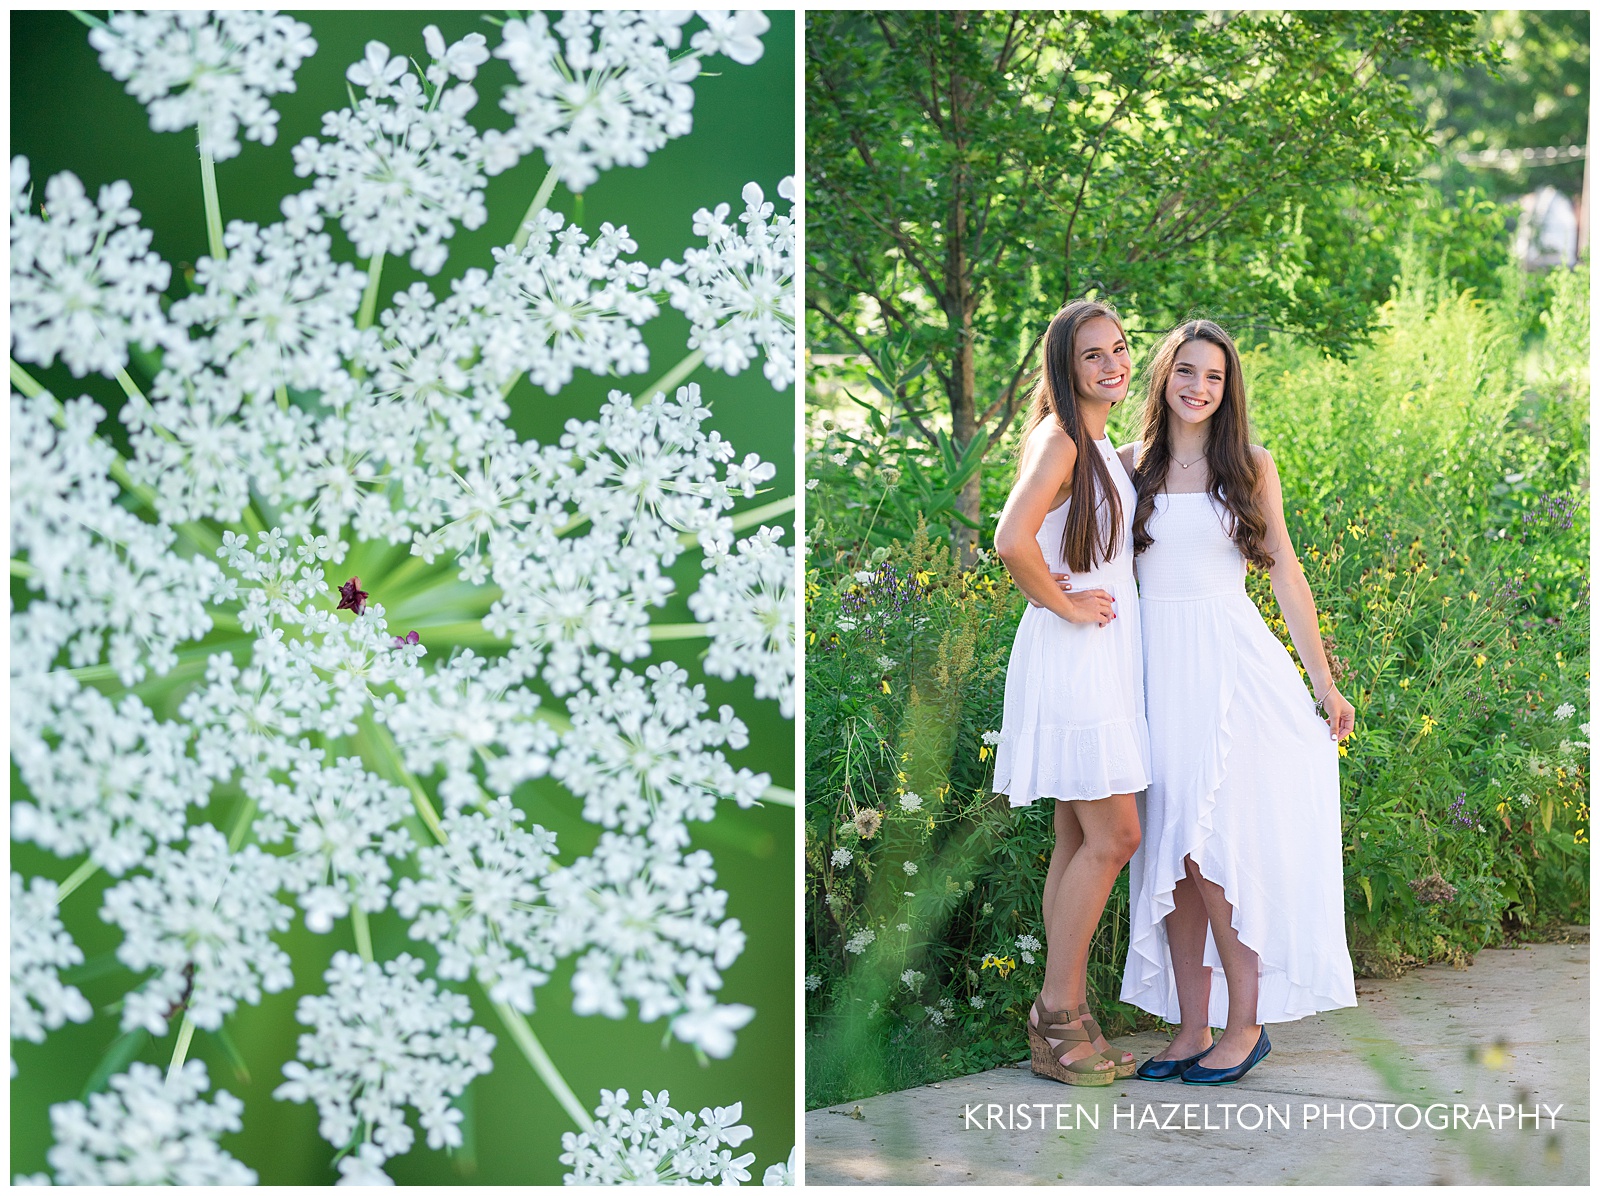 Two sisters posing in a verdant setting